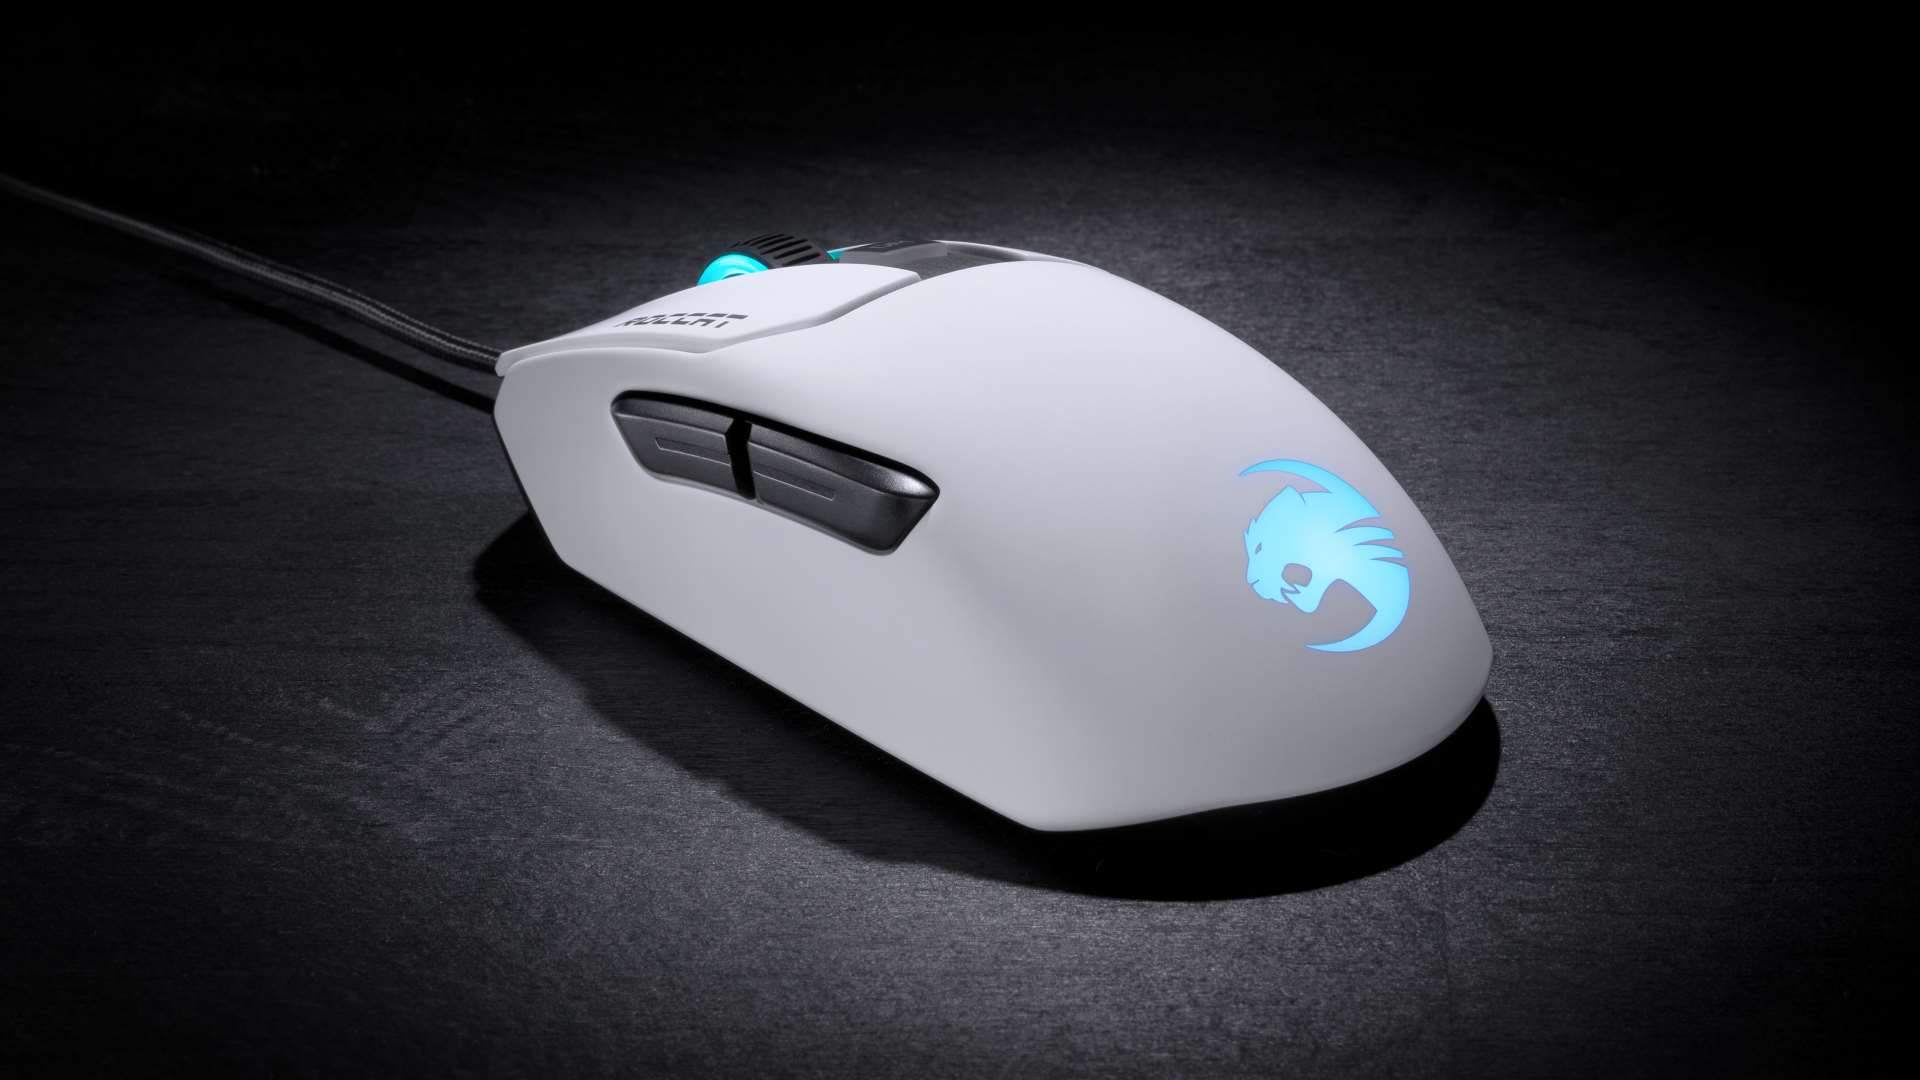 Roccat Kain 1 Aimo Gaming Mouse Review Lightweight Accurate And Super Responsive Pcgamesn